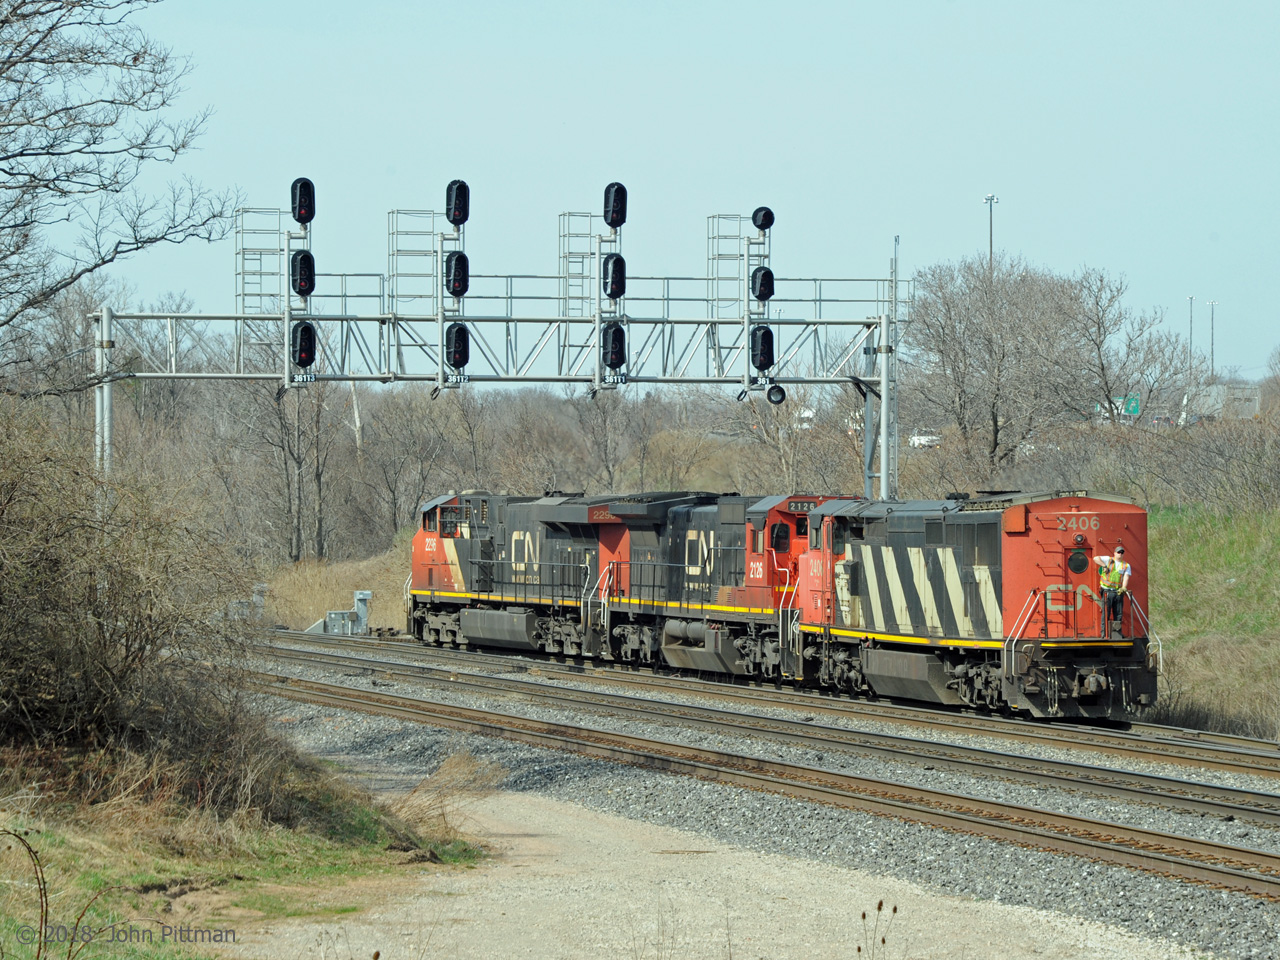 Not seen that often is a cowl body unit leading for several miles tail first, as CN 2406 (C40-8cowl), CN 2126 (C40-8), and CN 2296 (ES44dc) enter the west lead to Aldershot Yard at control point CN Snake. They are front end power of train CN 421, returning after delivering tank cars to RaiLink at Stuart St Yard in Hamilton. The man on the back walkway is guiding the engineer in CN 2296 for this reverse move. 
After completing a lift from Aldershot Yard and rejoining the train, CN 421 will continue to Port Robinson. Midtrain unit CN 2106 (C40-8) will help move the outbound 720 axle train.